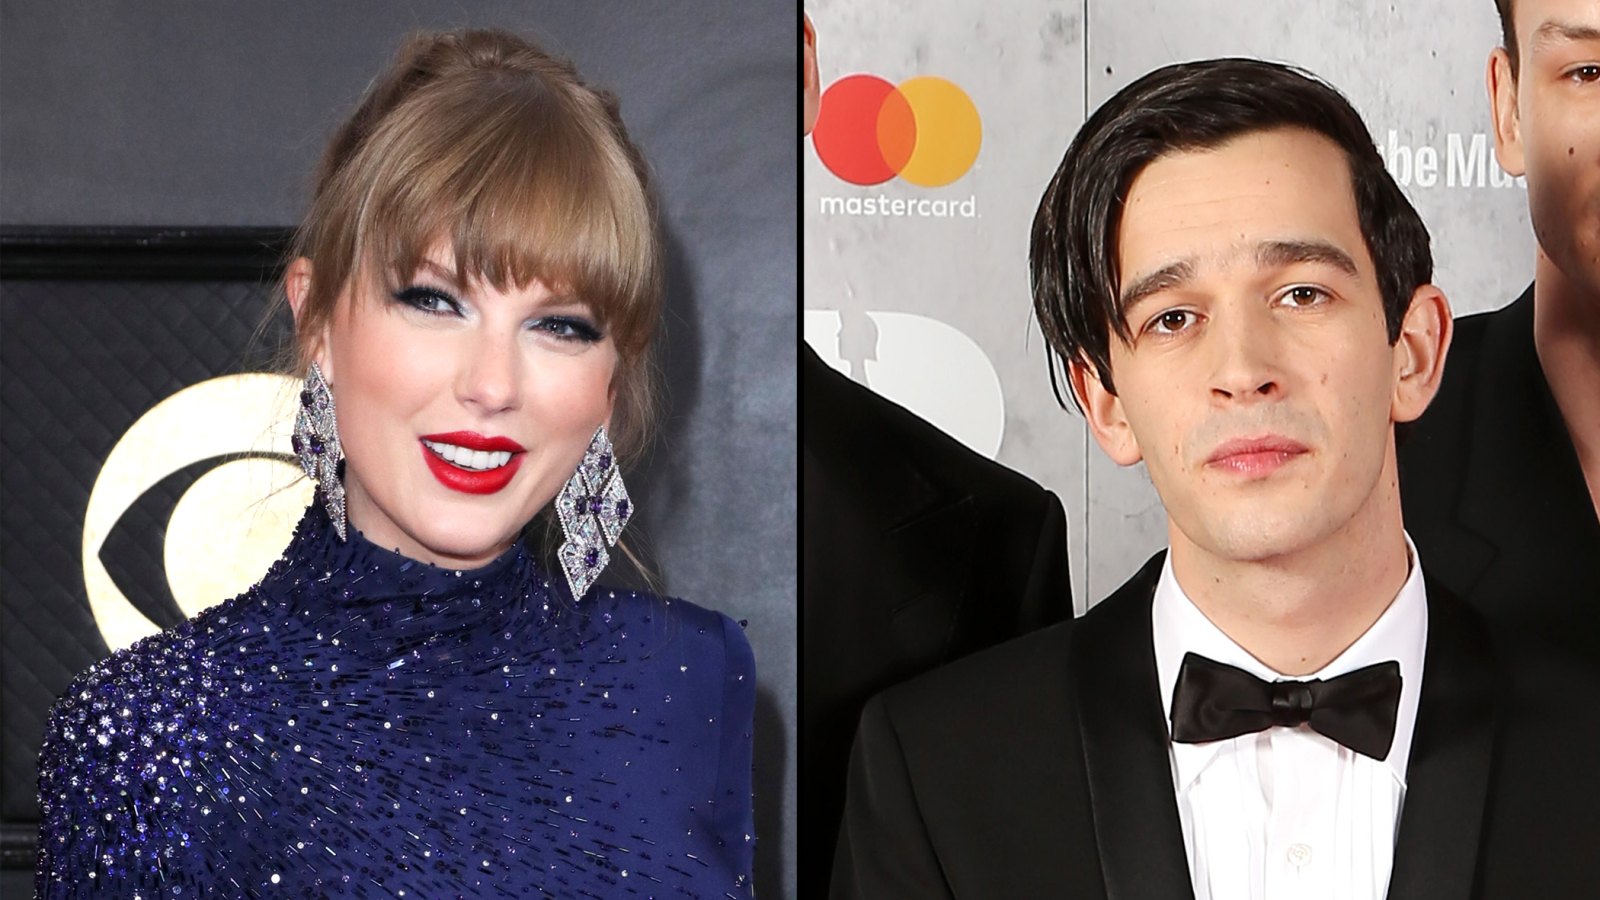 Taylor Swift and Matty Healy Are Having Fun Together After Briefly Dating Years Ago